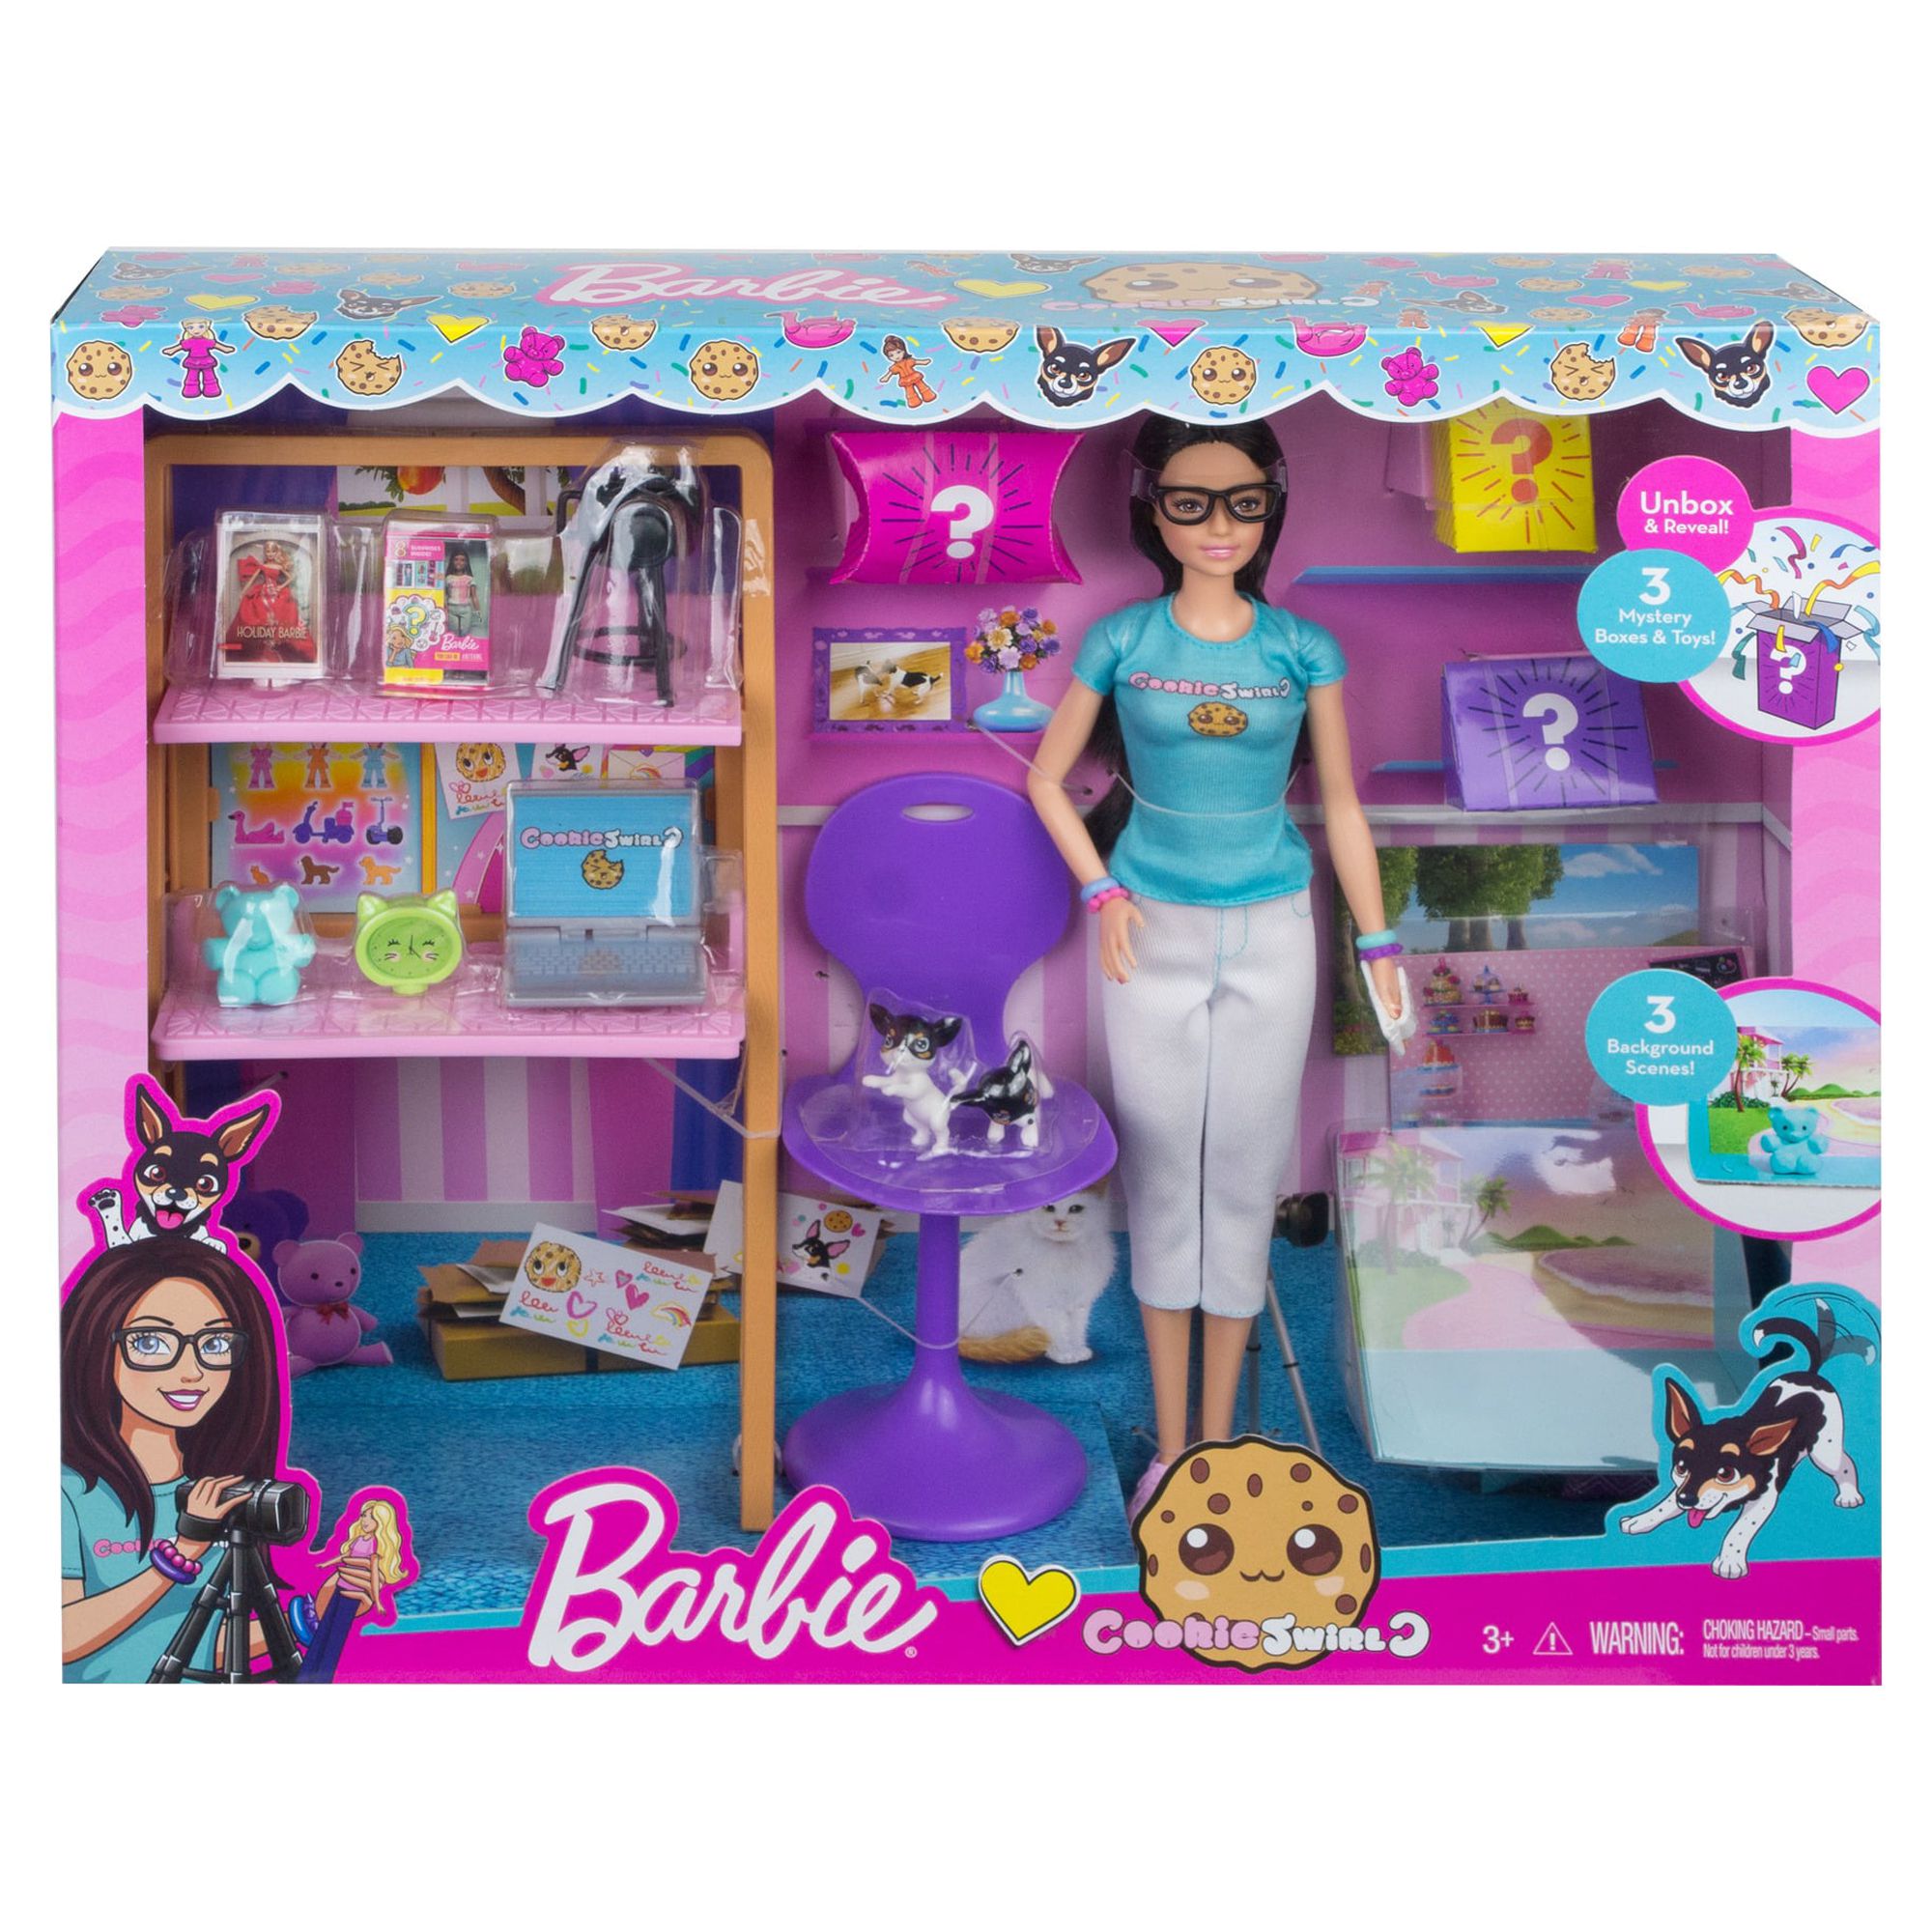 Barbie CookieSwirlC Doll and Accessories - image 5 of 6